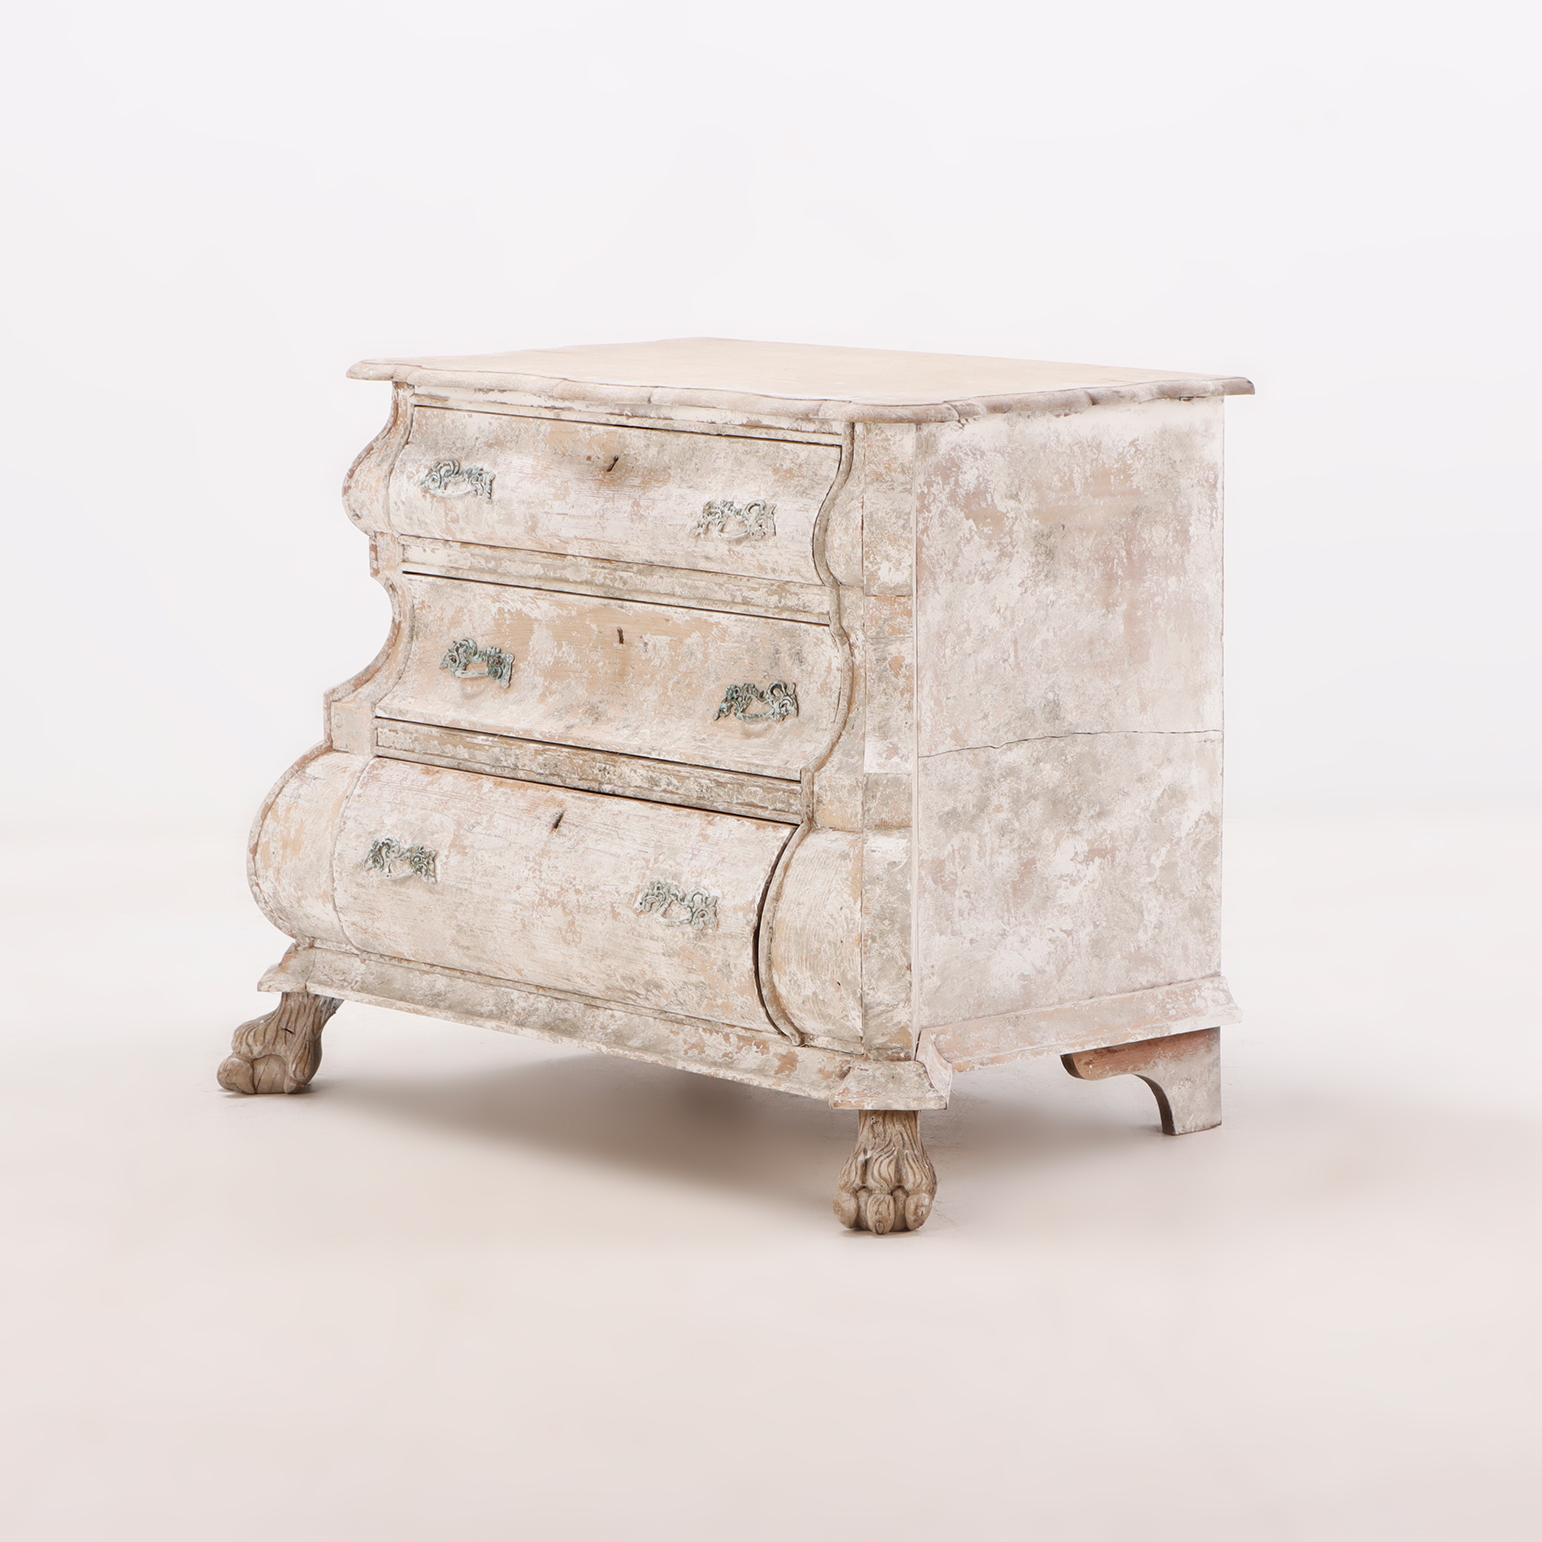 A Nineteenth Century Dutch bombay three drawer commode in bleached finish with claw feet. 